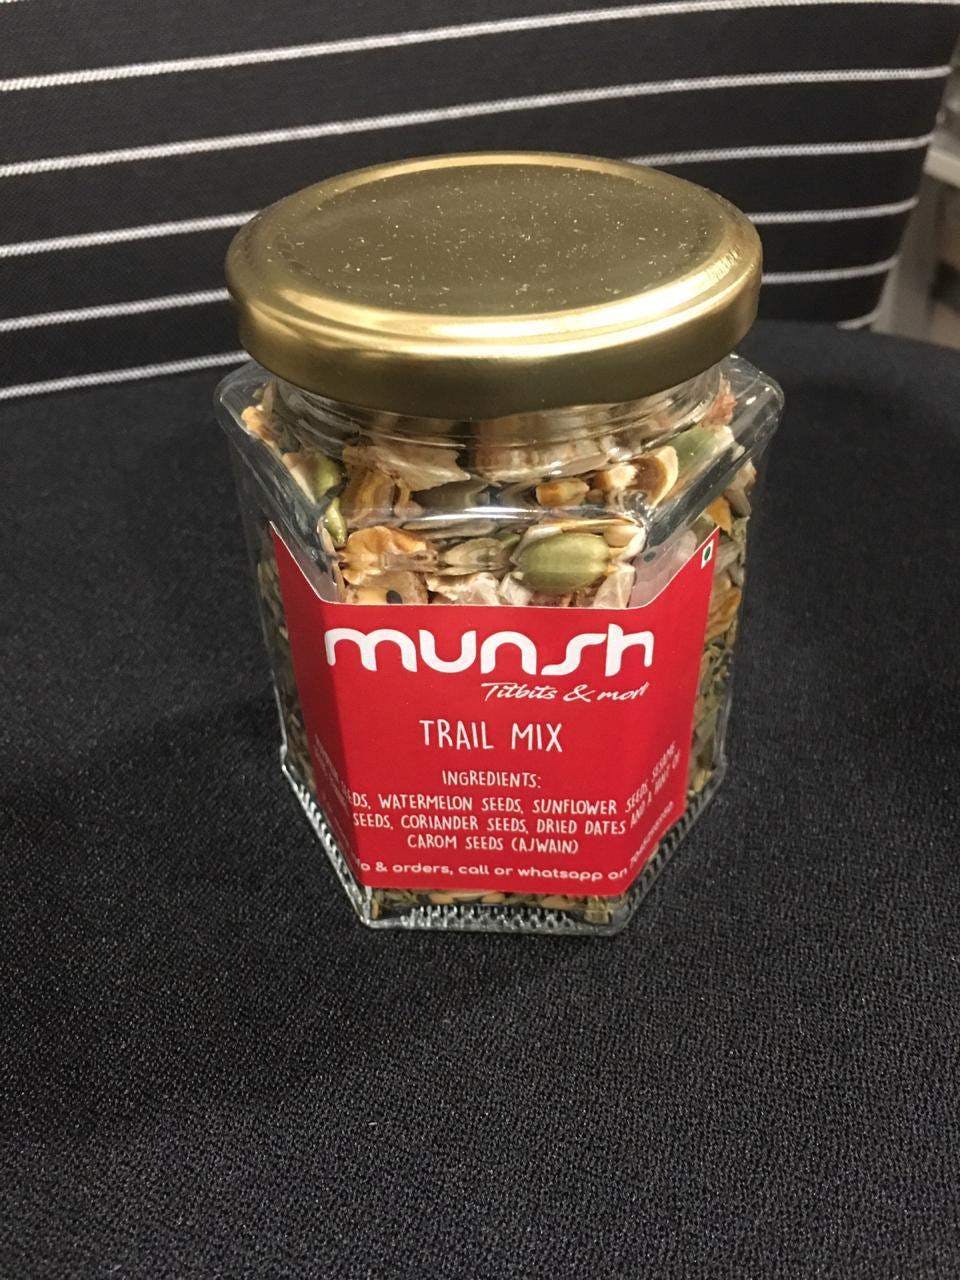 A Nutritious Home-Made Trail Mix To Curb Hunger Pangs